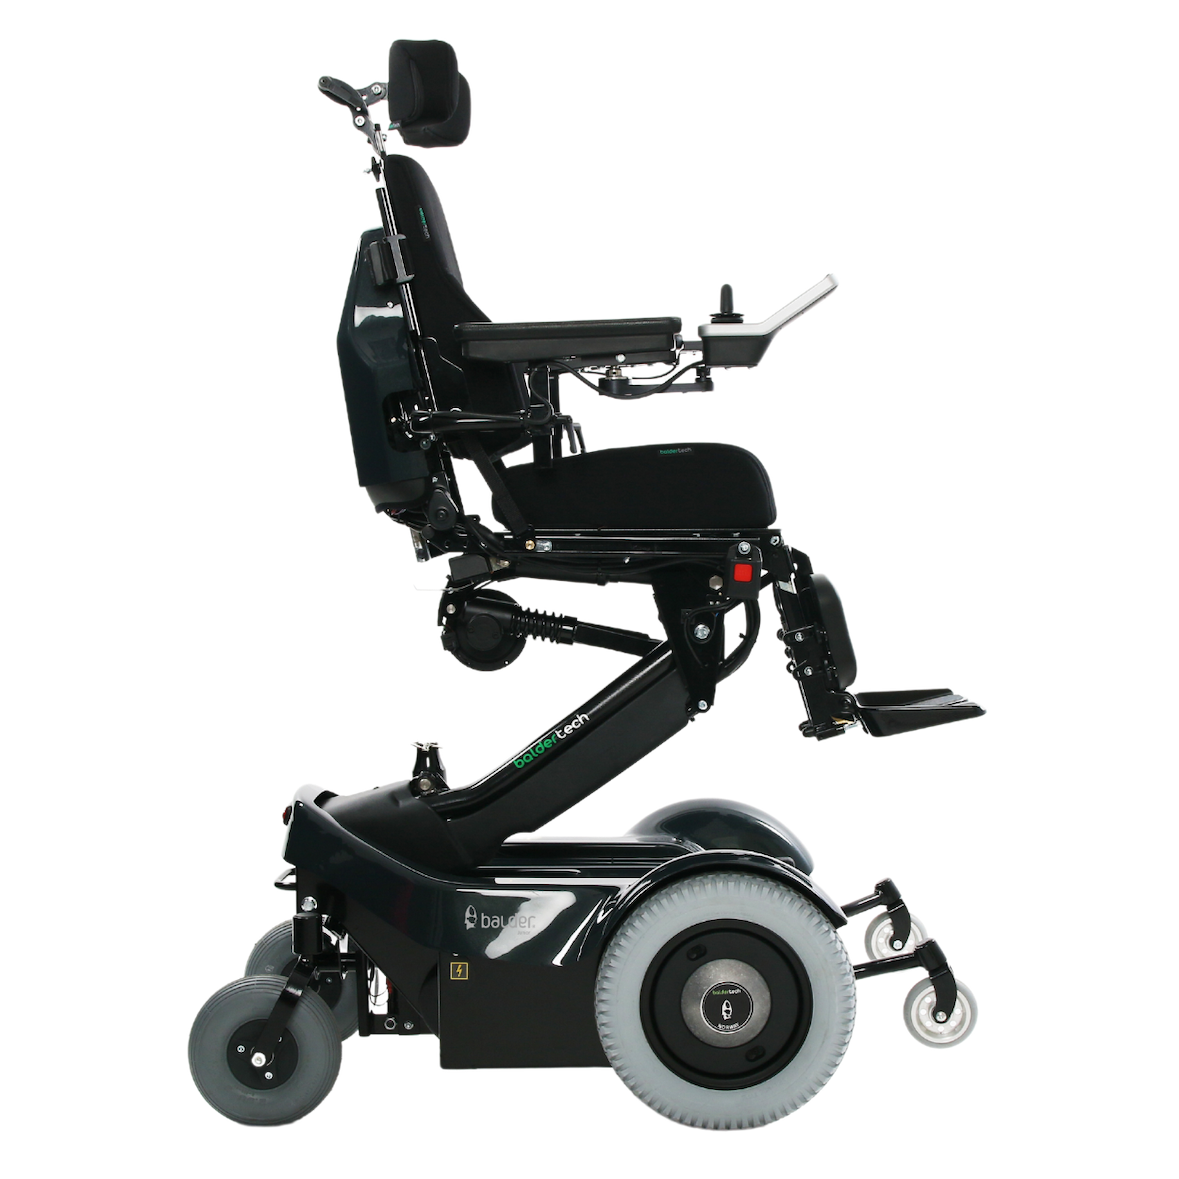 A Balder Junior J340 childrens standing powerchair. Shown in an elevated seating position